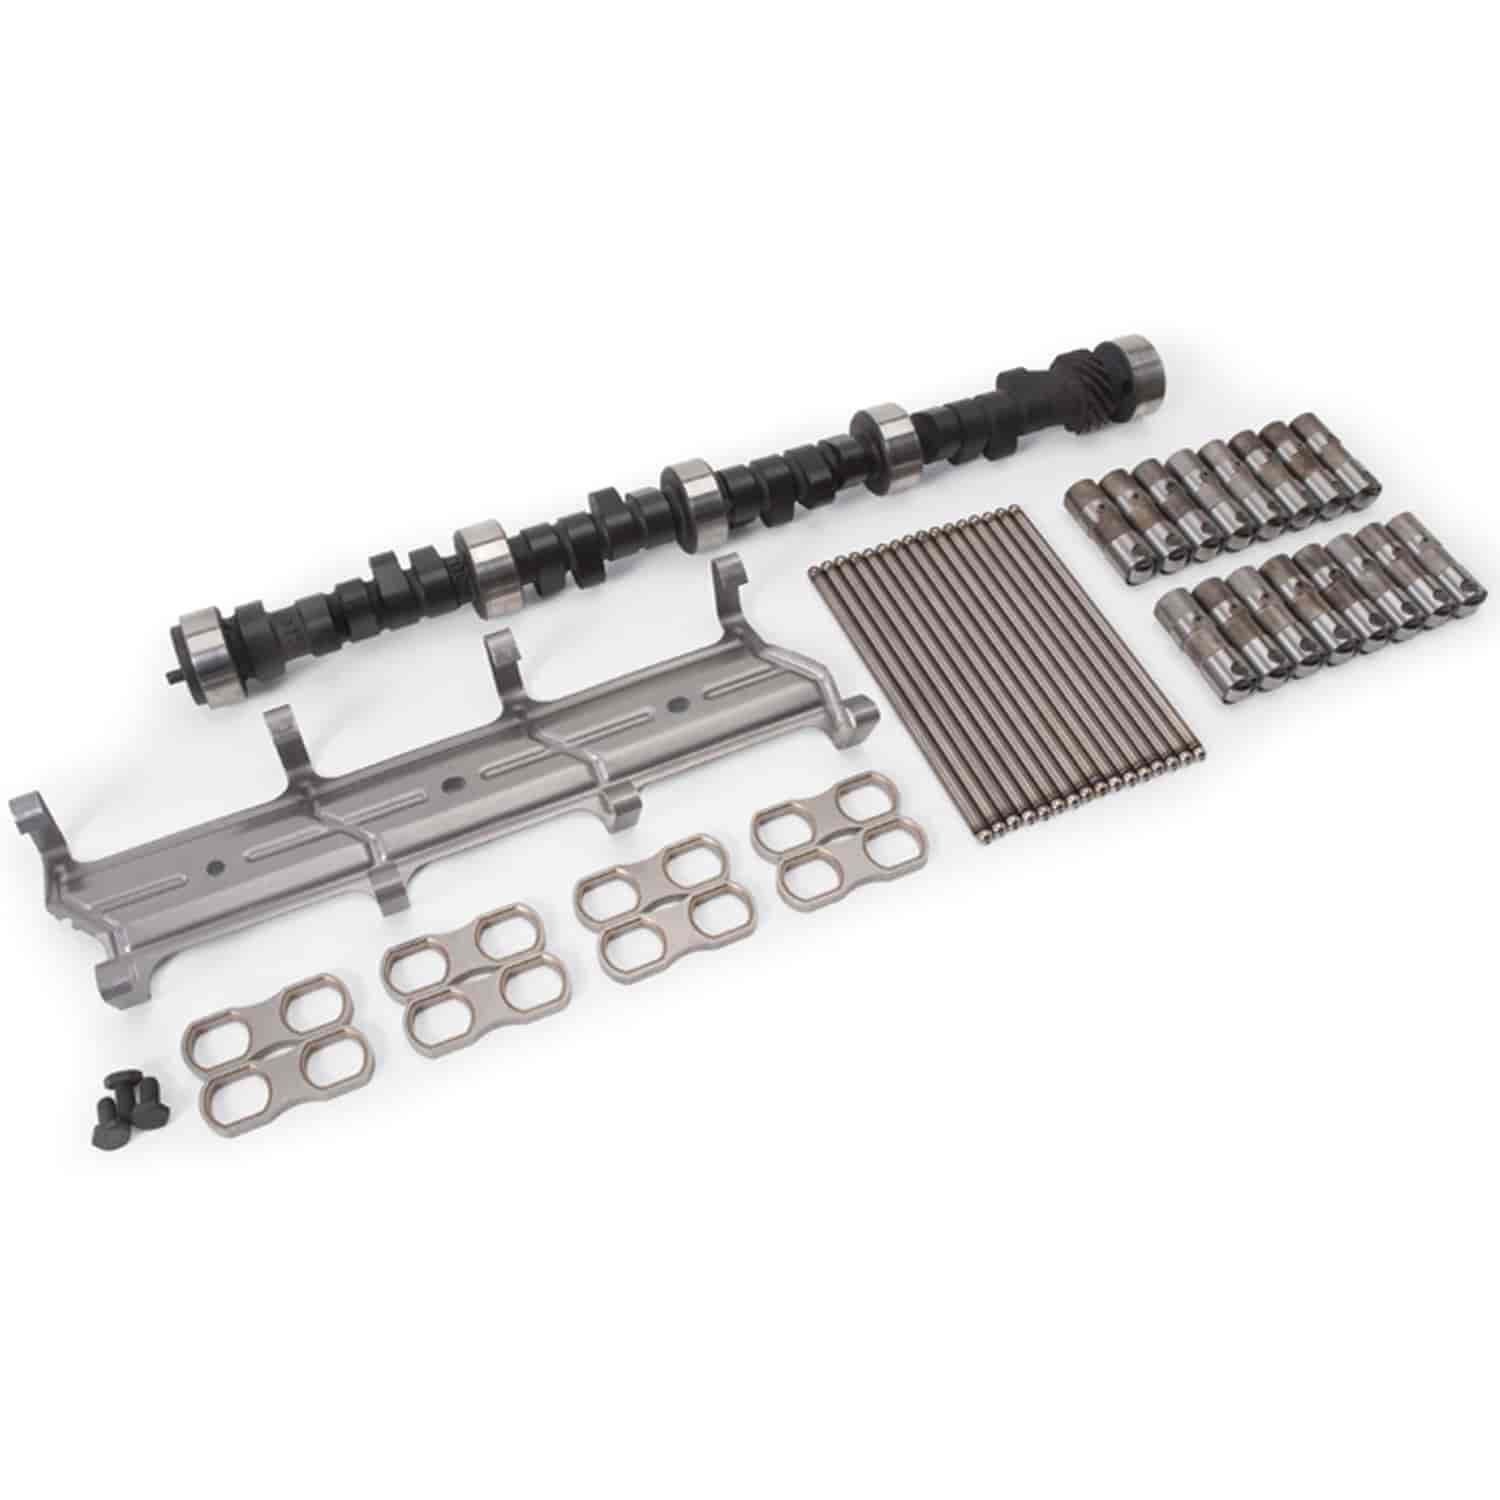 Rollin' Thunder Hydraulic Roller Camshaft Kit for 1987-Later